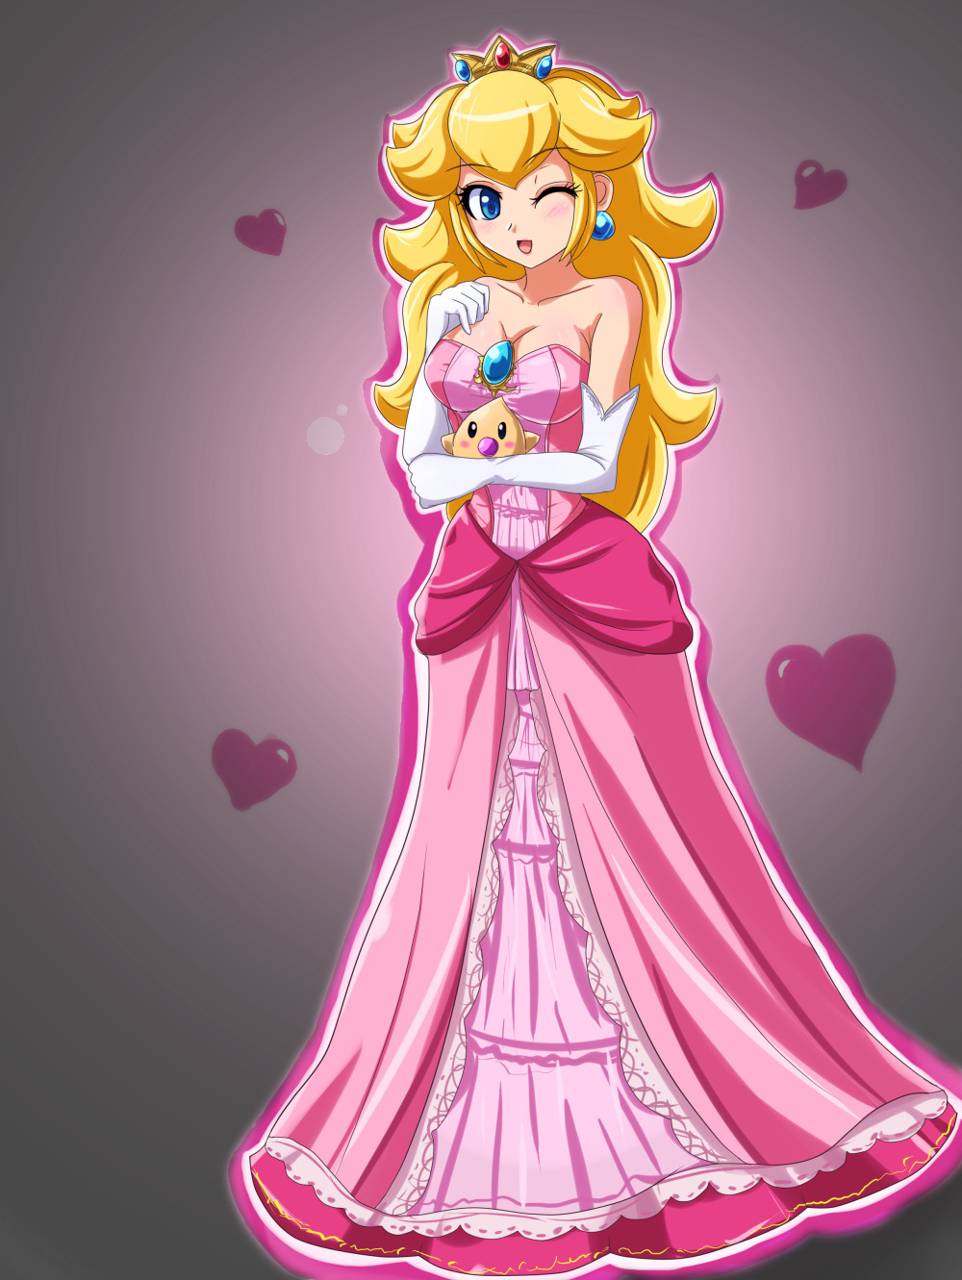 Princess Peach from the Mario franchise, wearing a pink dress and holding a baby peach. - Princess Peach